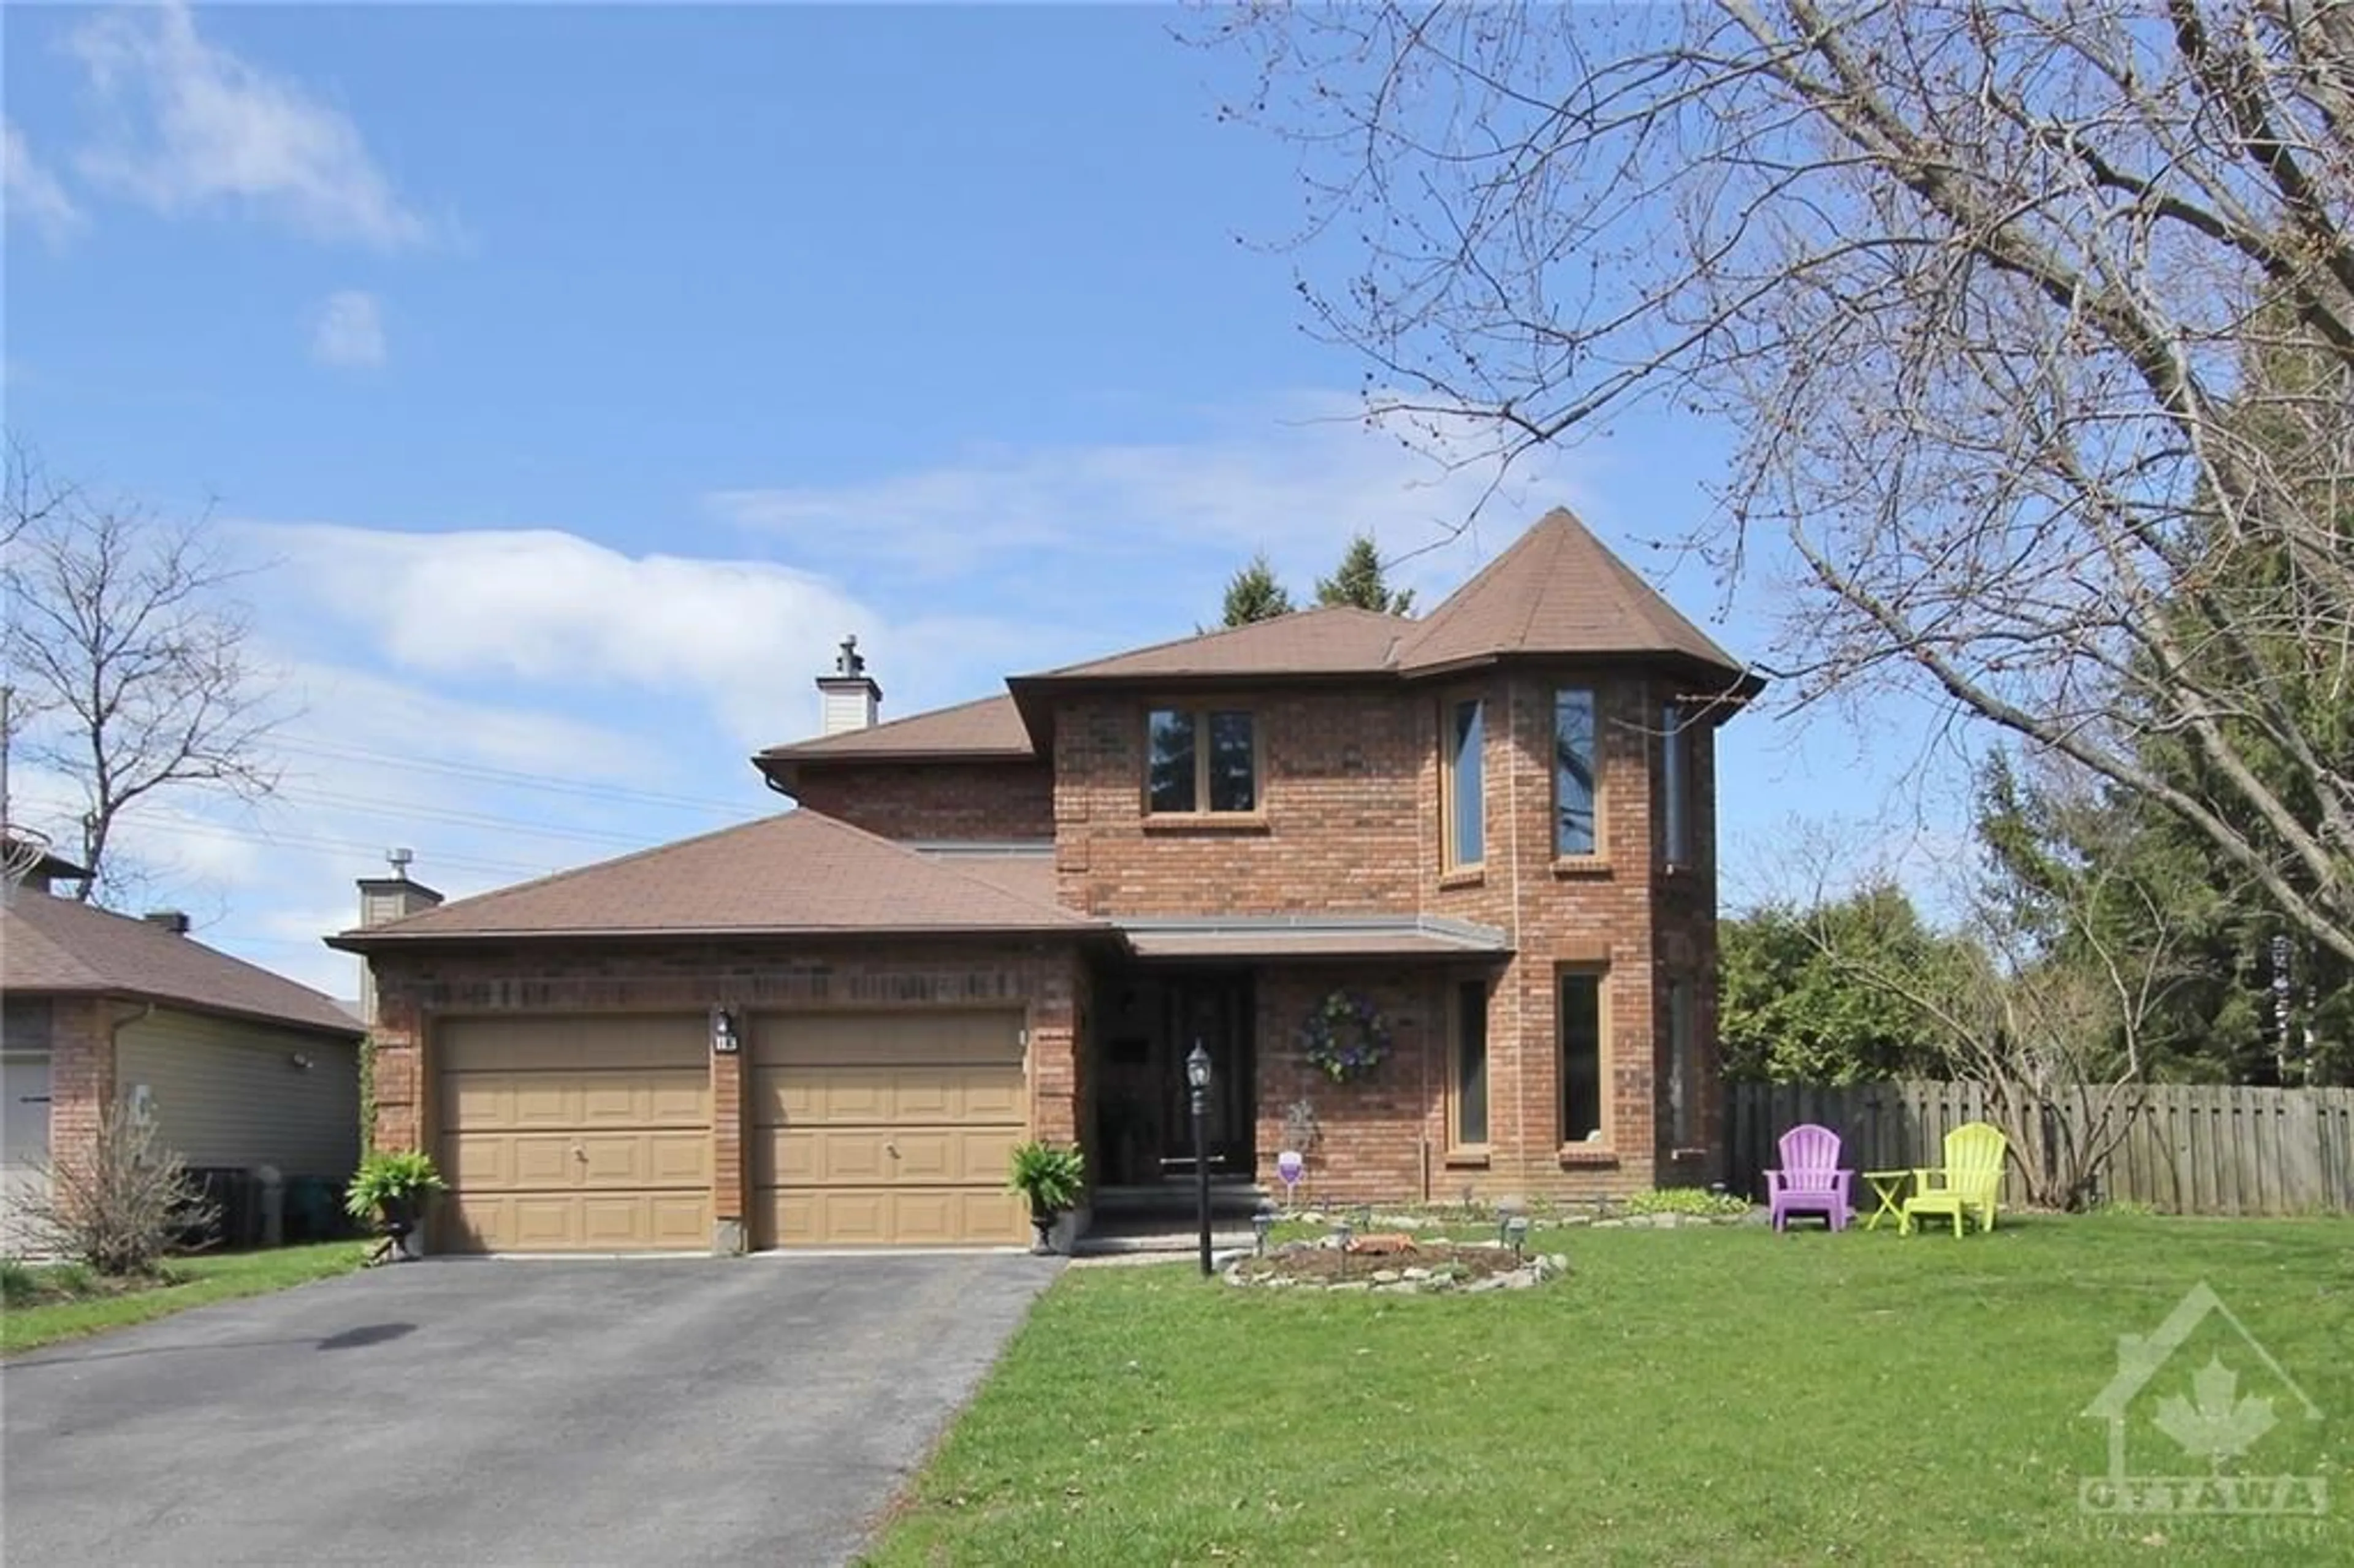 Home with brick exterior material for 113 HUNTSMAN Cres, Ottawa Ontario K2M 1H8